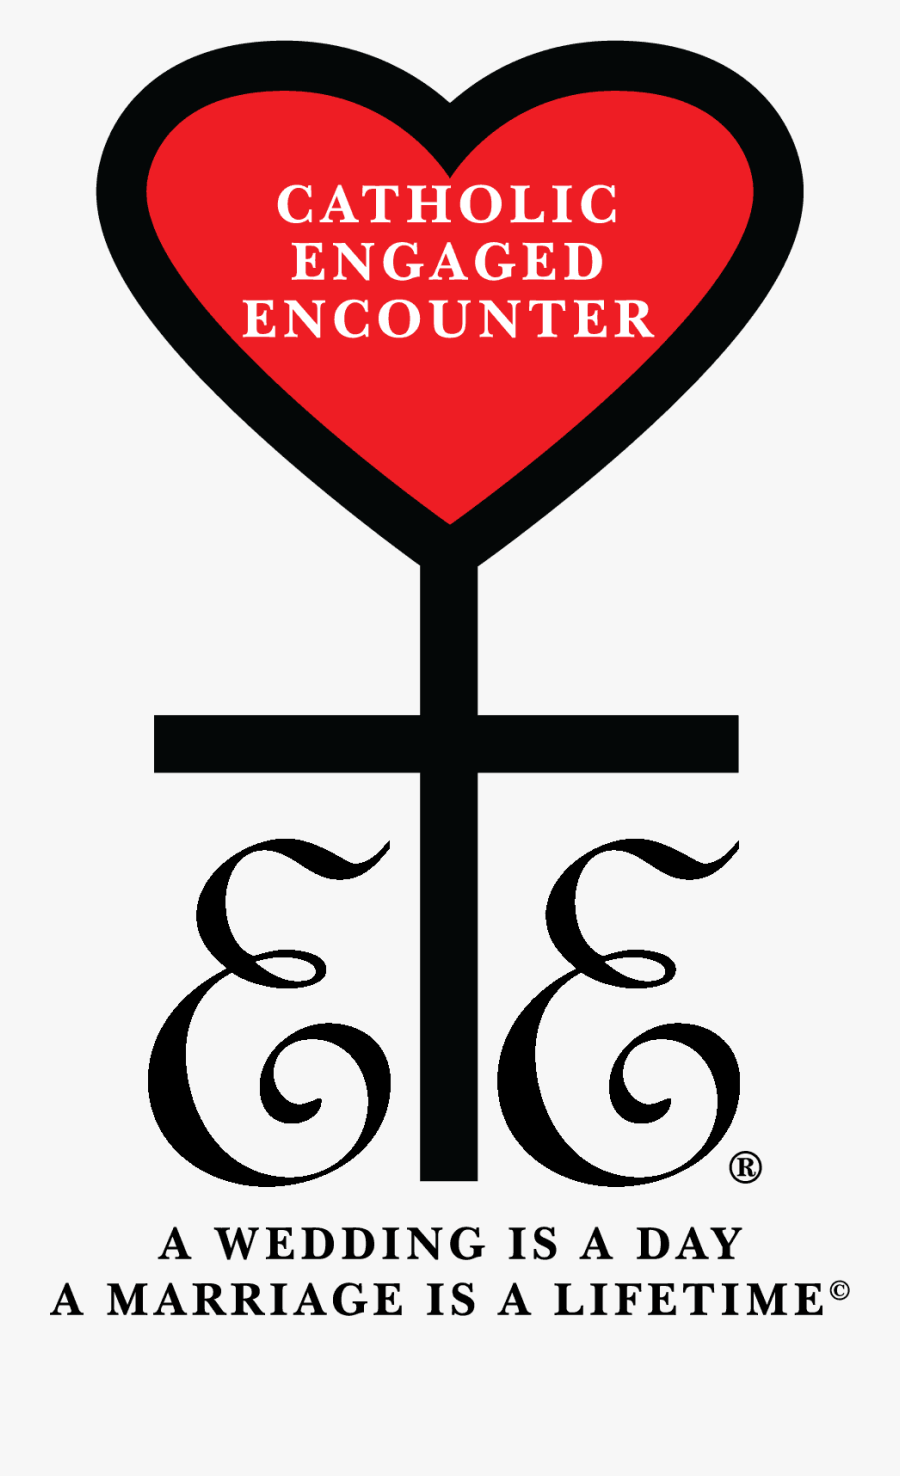 Engaged Encounter , Free Transparent Clipart - ClipartKey